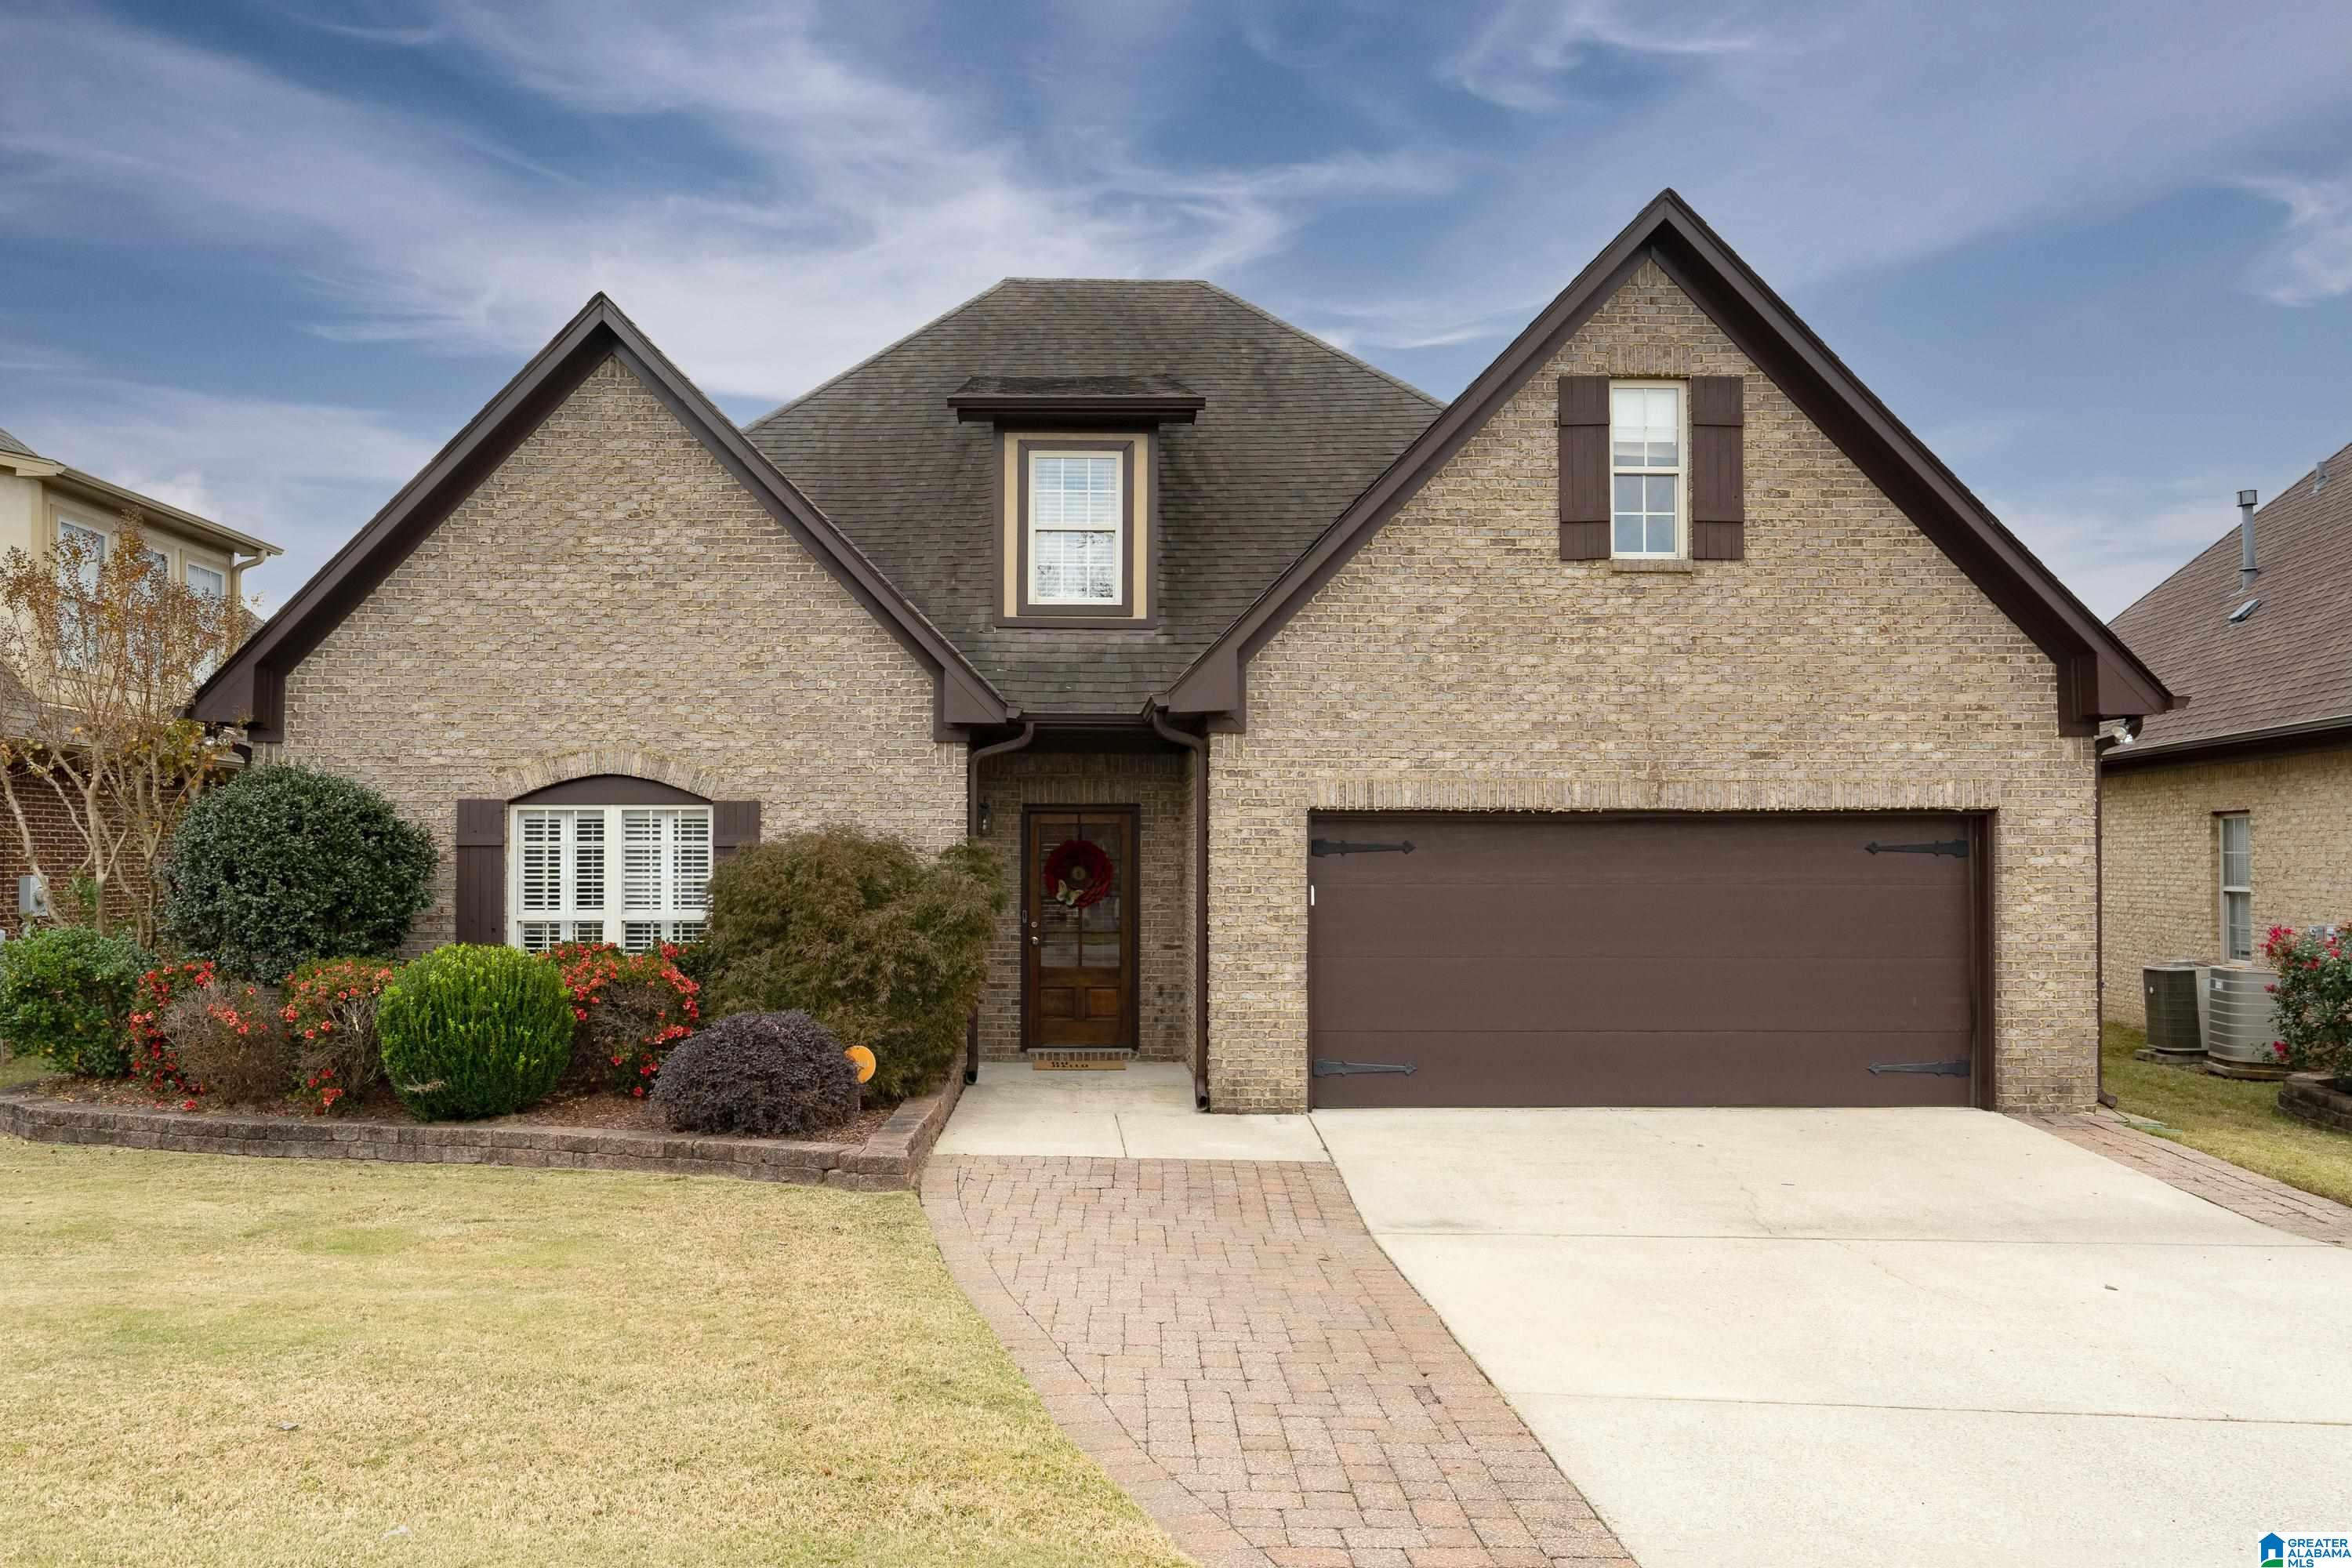 Photo of 6257 KESTRAL VIEW ROAD TRUSSVILLE